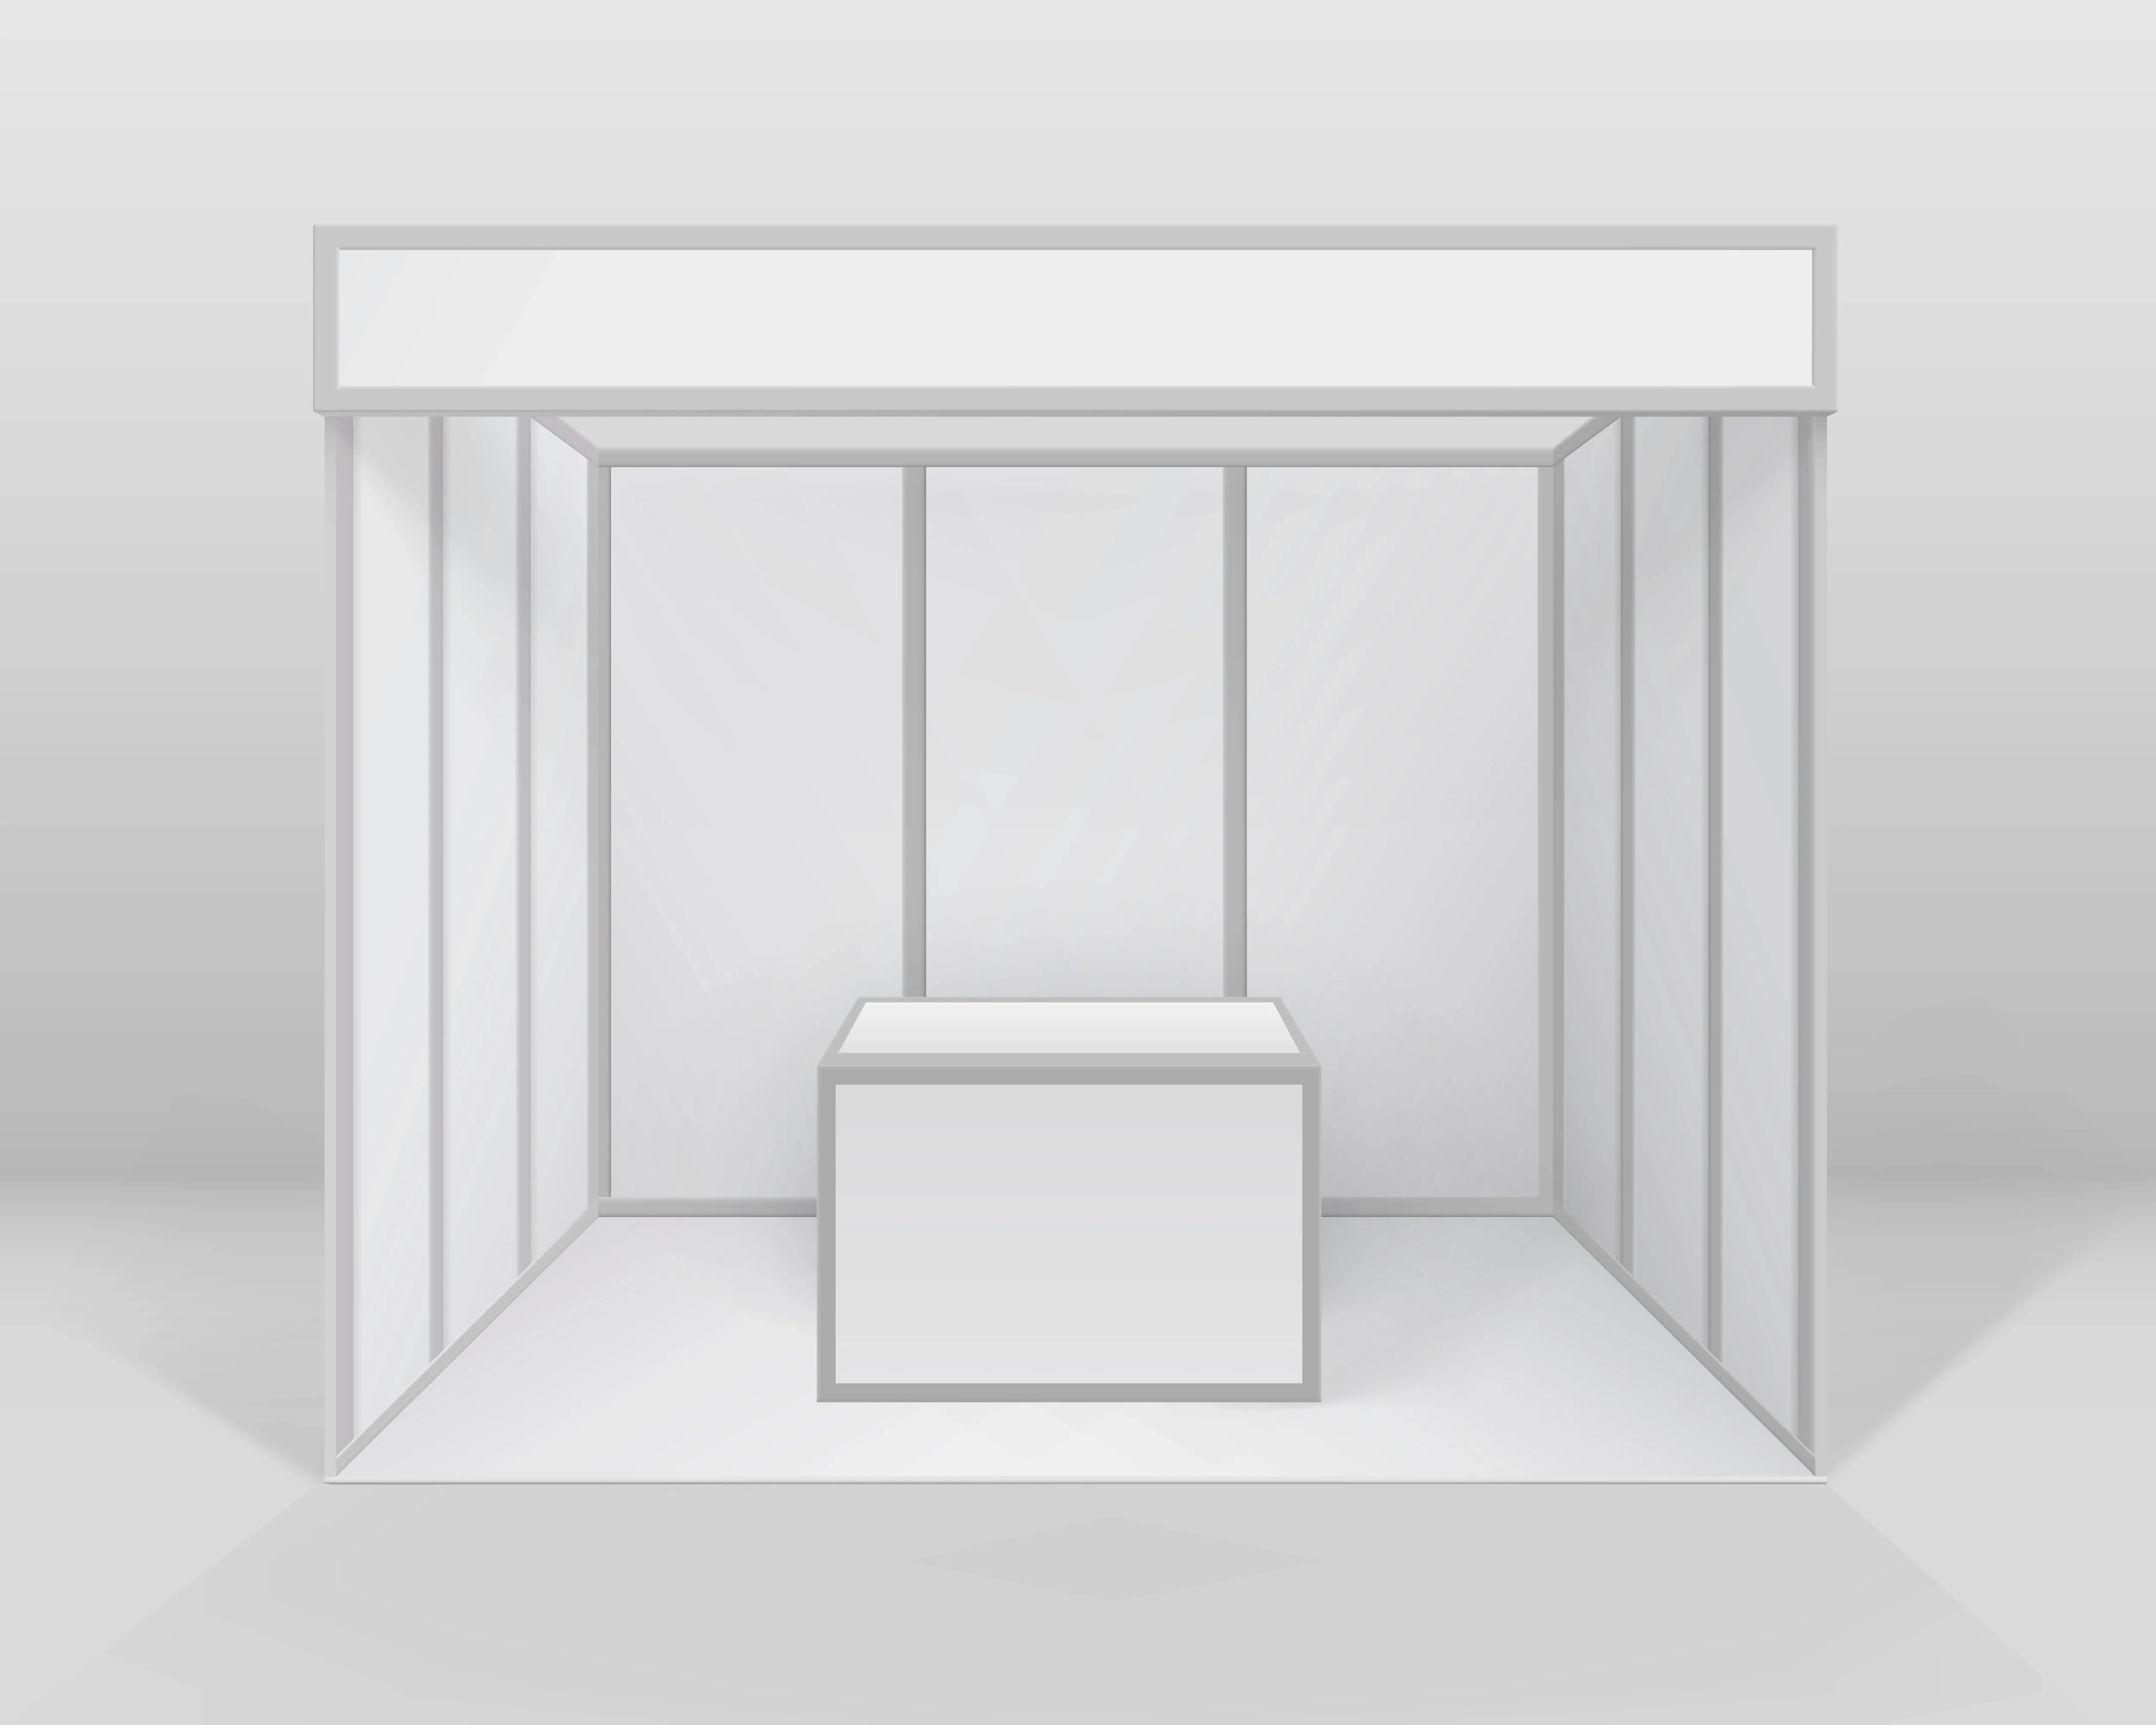 White blank indoor trade exhibition booth standard stand for presentation with counter isolated on background